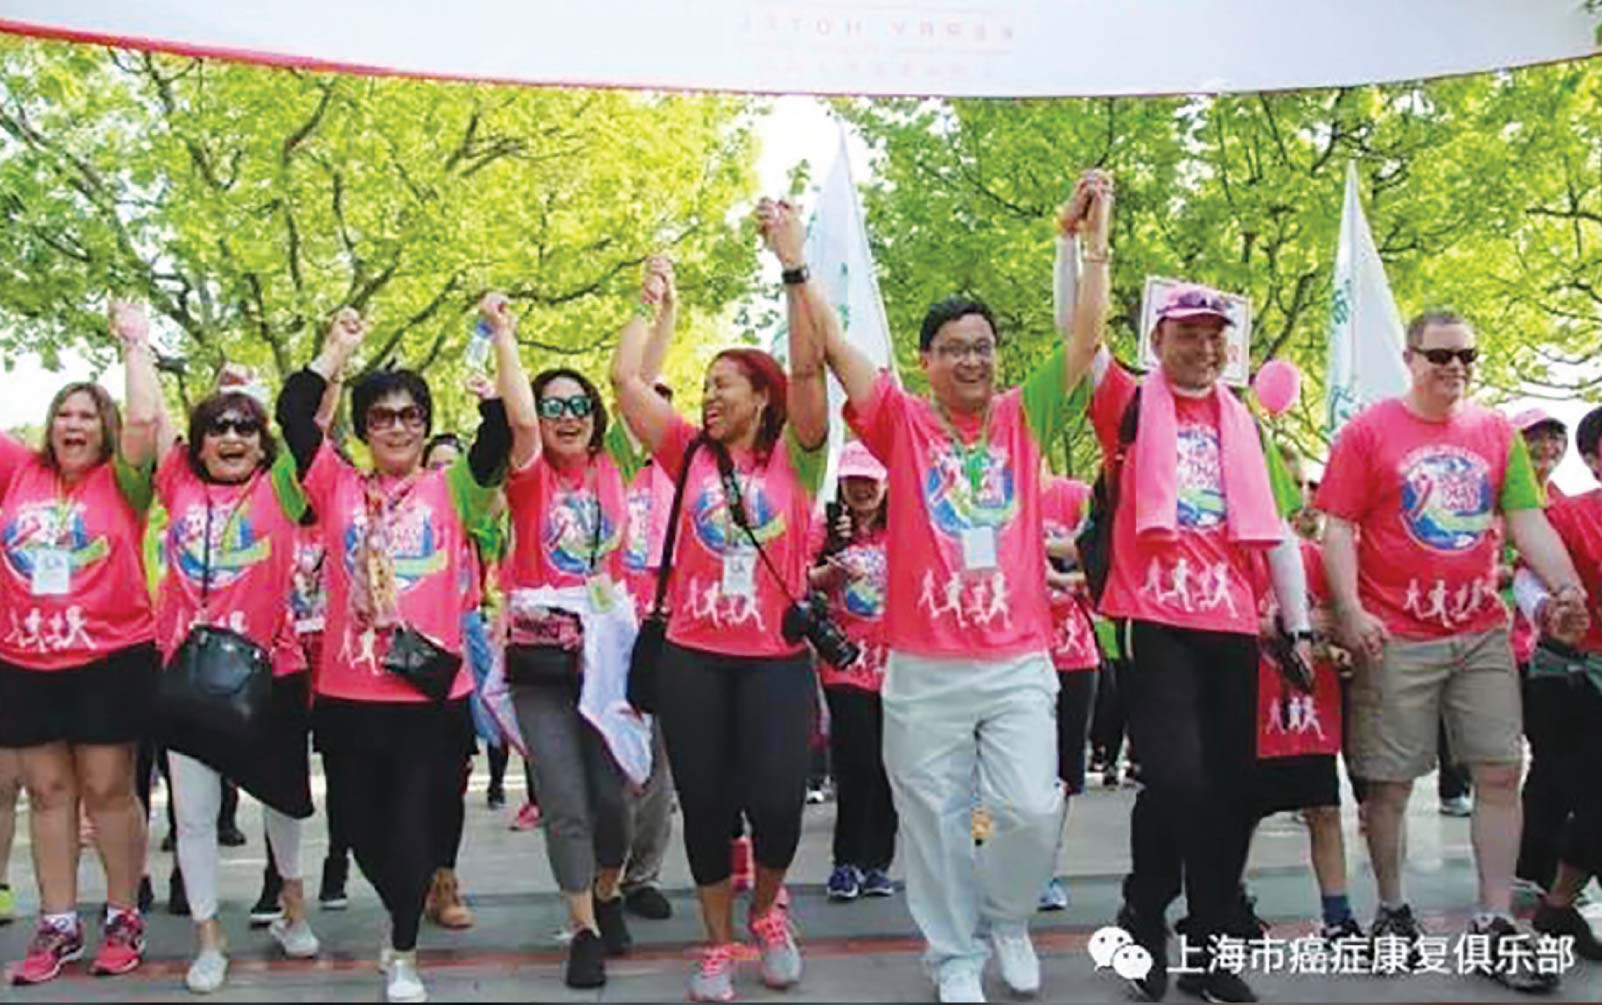 Profile of Advocacy: Shanghai Cancer Recovery Club